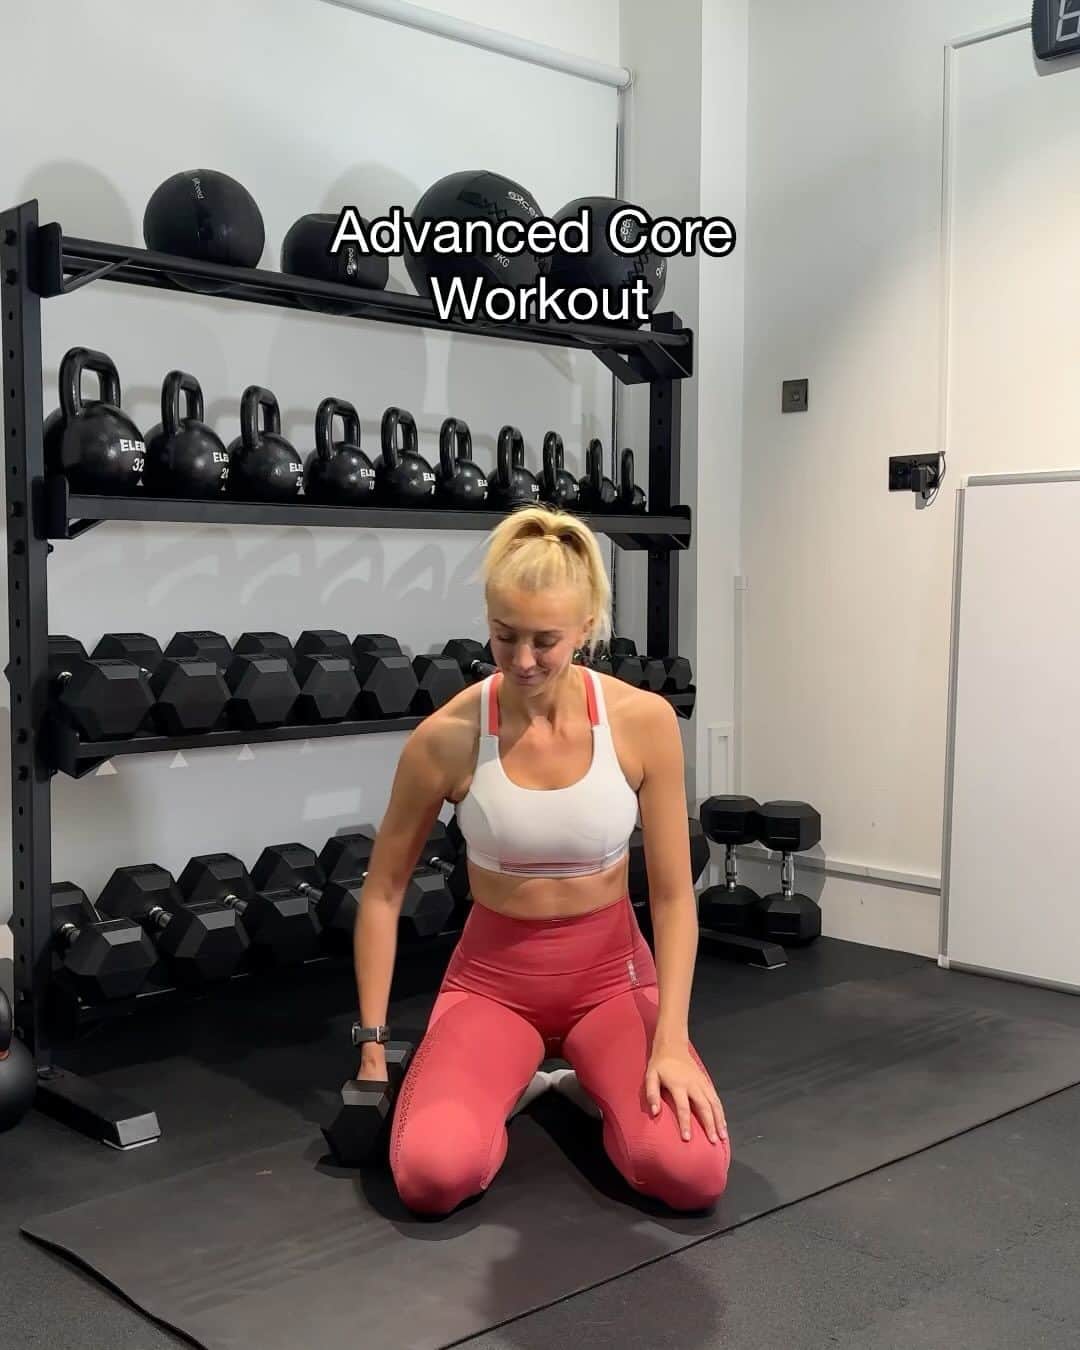 Zanna Van Dijkのインスタグラム：「Advanced Core Workout 🔥 This seriously spicy ab workout is for those days you really want to challenge yourself! It uses dumbbells and your body weight to give a deeeeeeep burn 🥵   Go for three rounds of:  ➡️ 16 Lateral V Sits  ➡️ 10 Pike Leg Lifts  ➡️ 10 Extended V Sit Lowers  ➡️ 12 Bear Dumbbell Taps   Tag your workout buddy & hit SAVE for later 👌🏼 #abworkout #coreworkout #athomeabs」